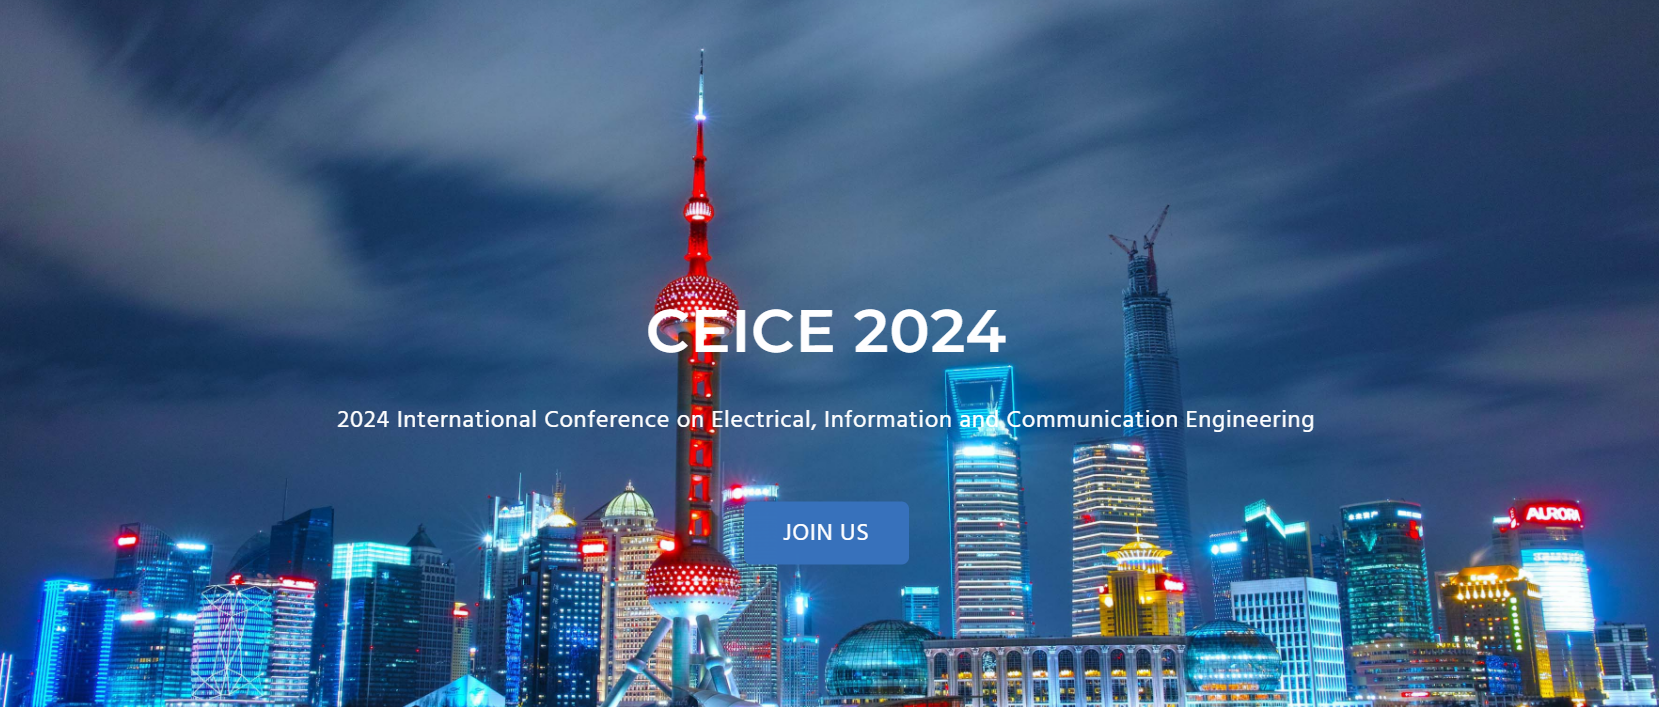 2024 International Conference on Electrical, Information and Communication Engineering (CEICE 2024) -EI Compendex, Shanghai, China